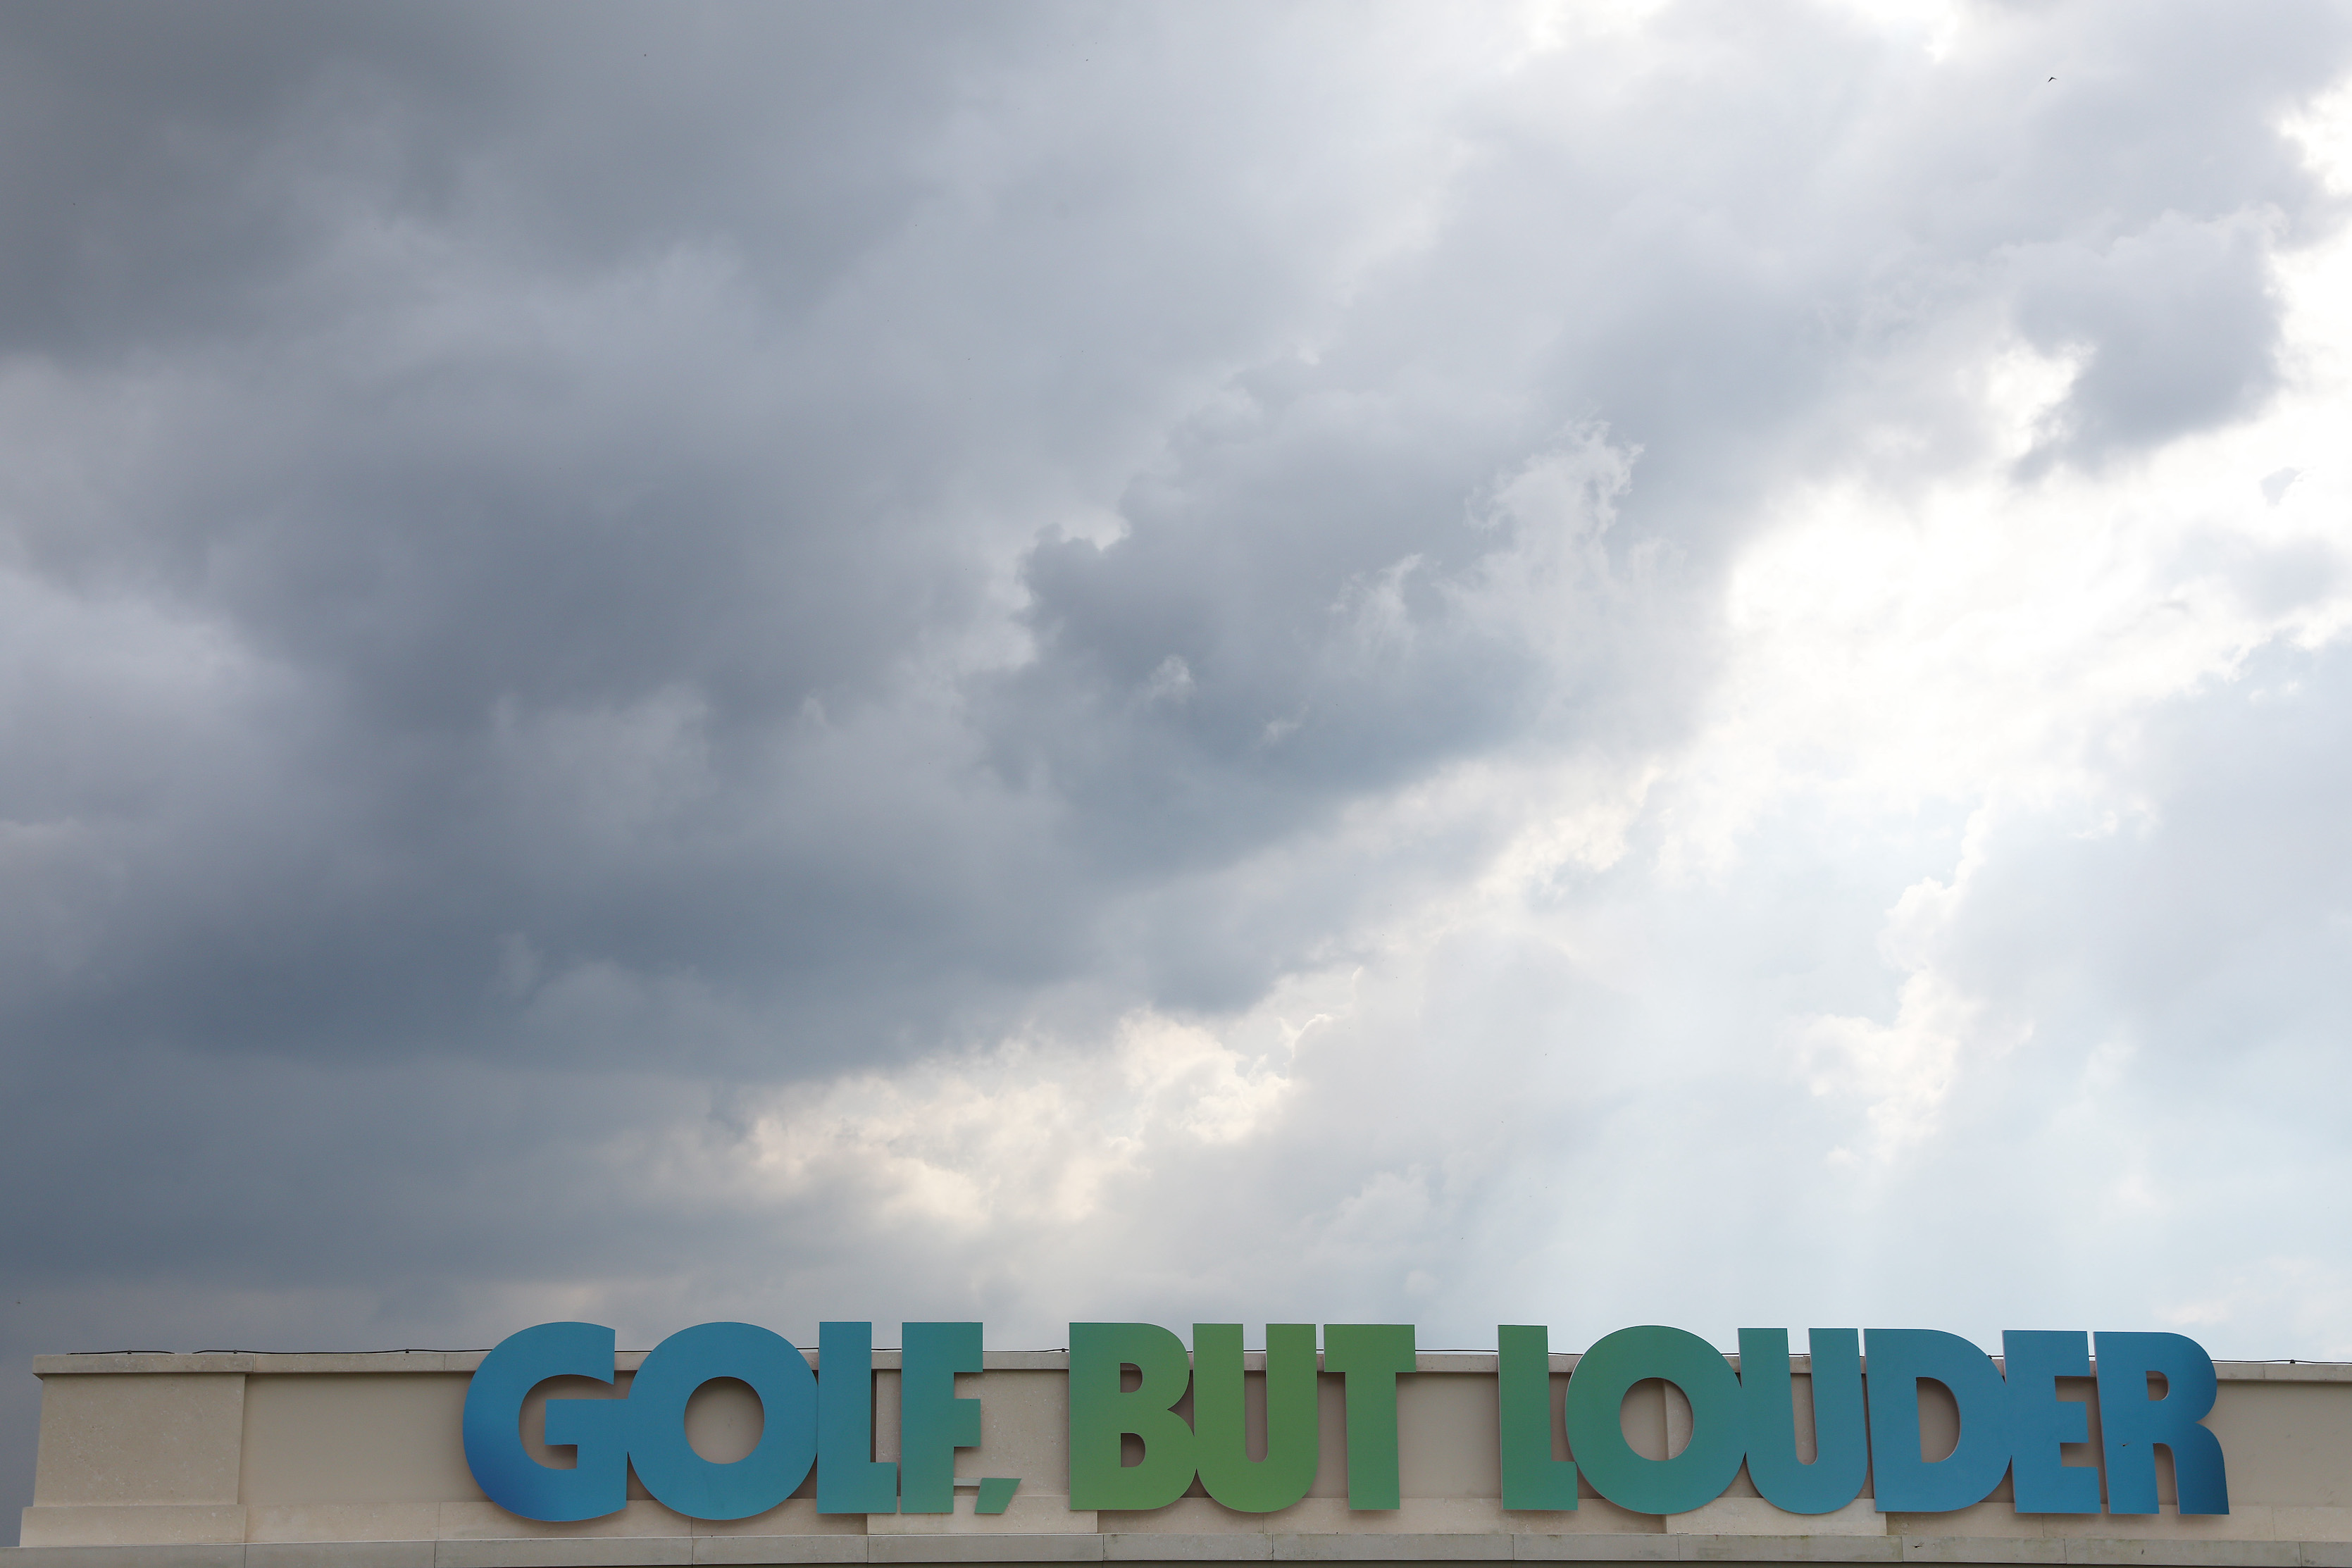 Ominous clouds over LIV Golf's slogan, "Golf, But Louder" at the tour's October event in Bangkok, Thailand.